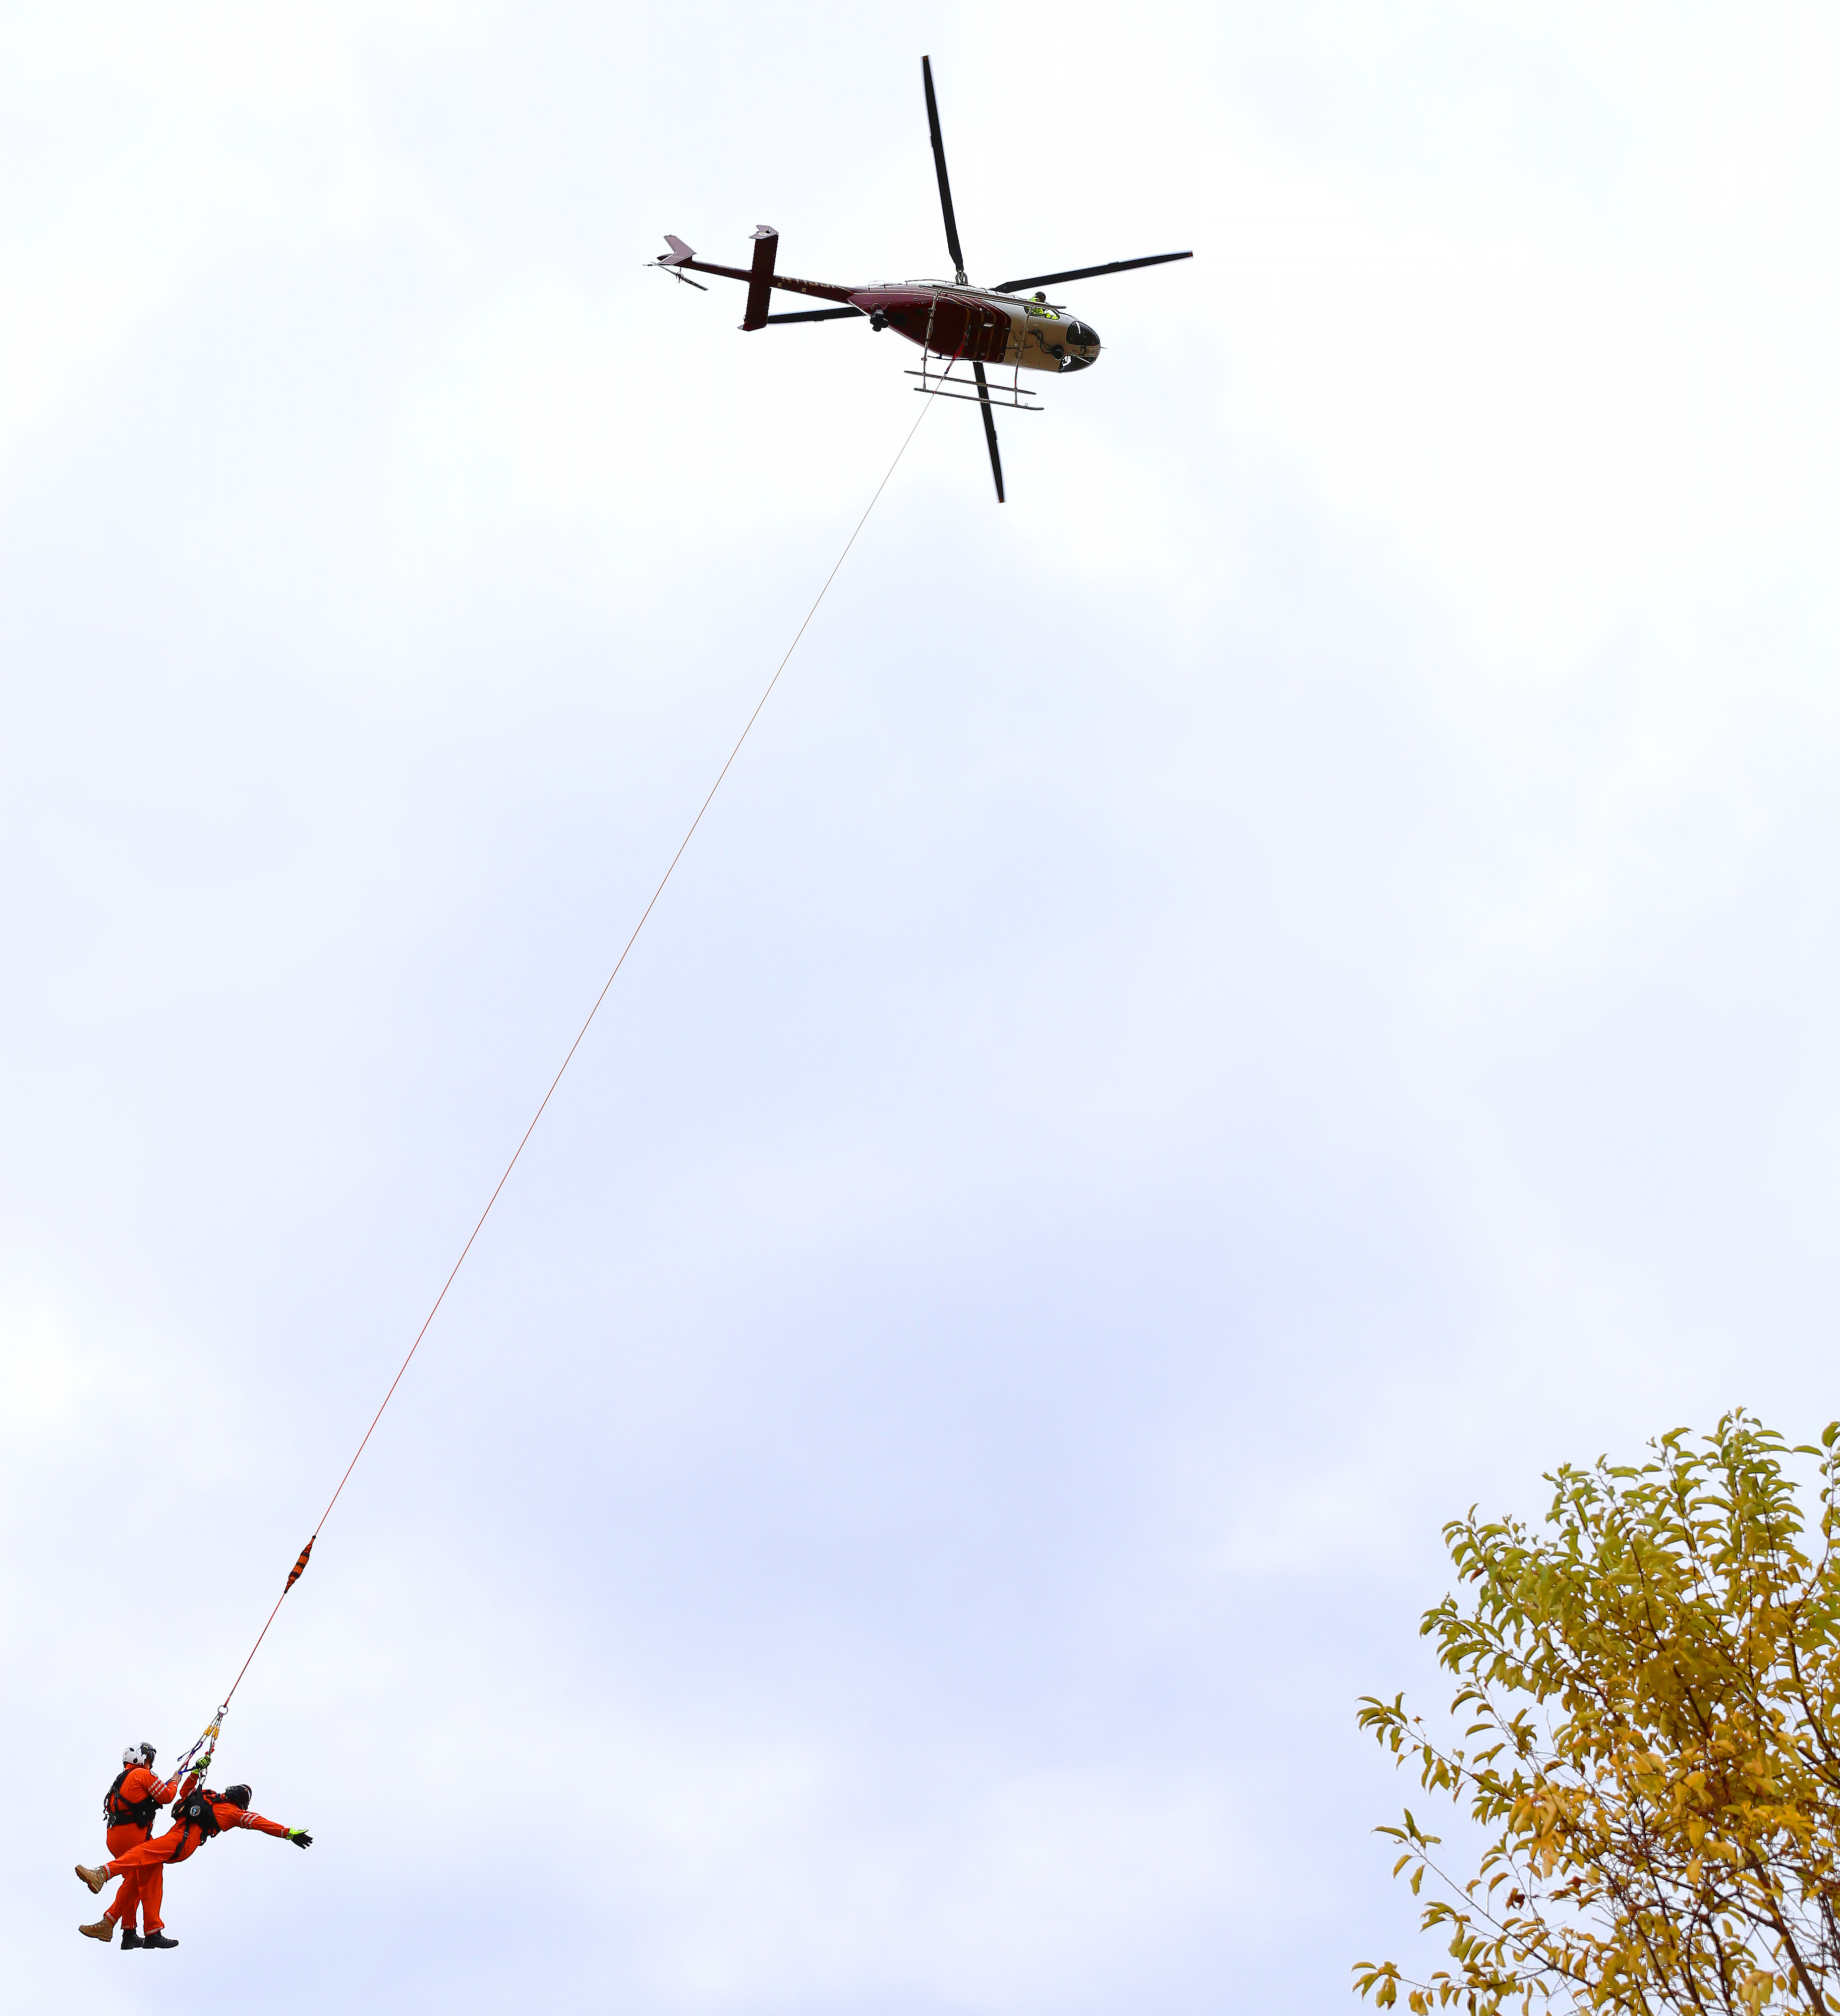 Two people in orange suits are rescued by a helicopter during a training exercise.